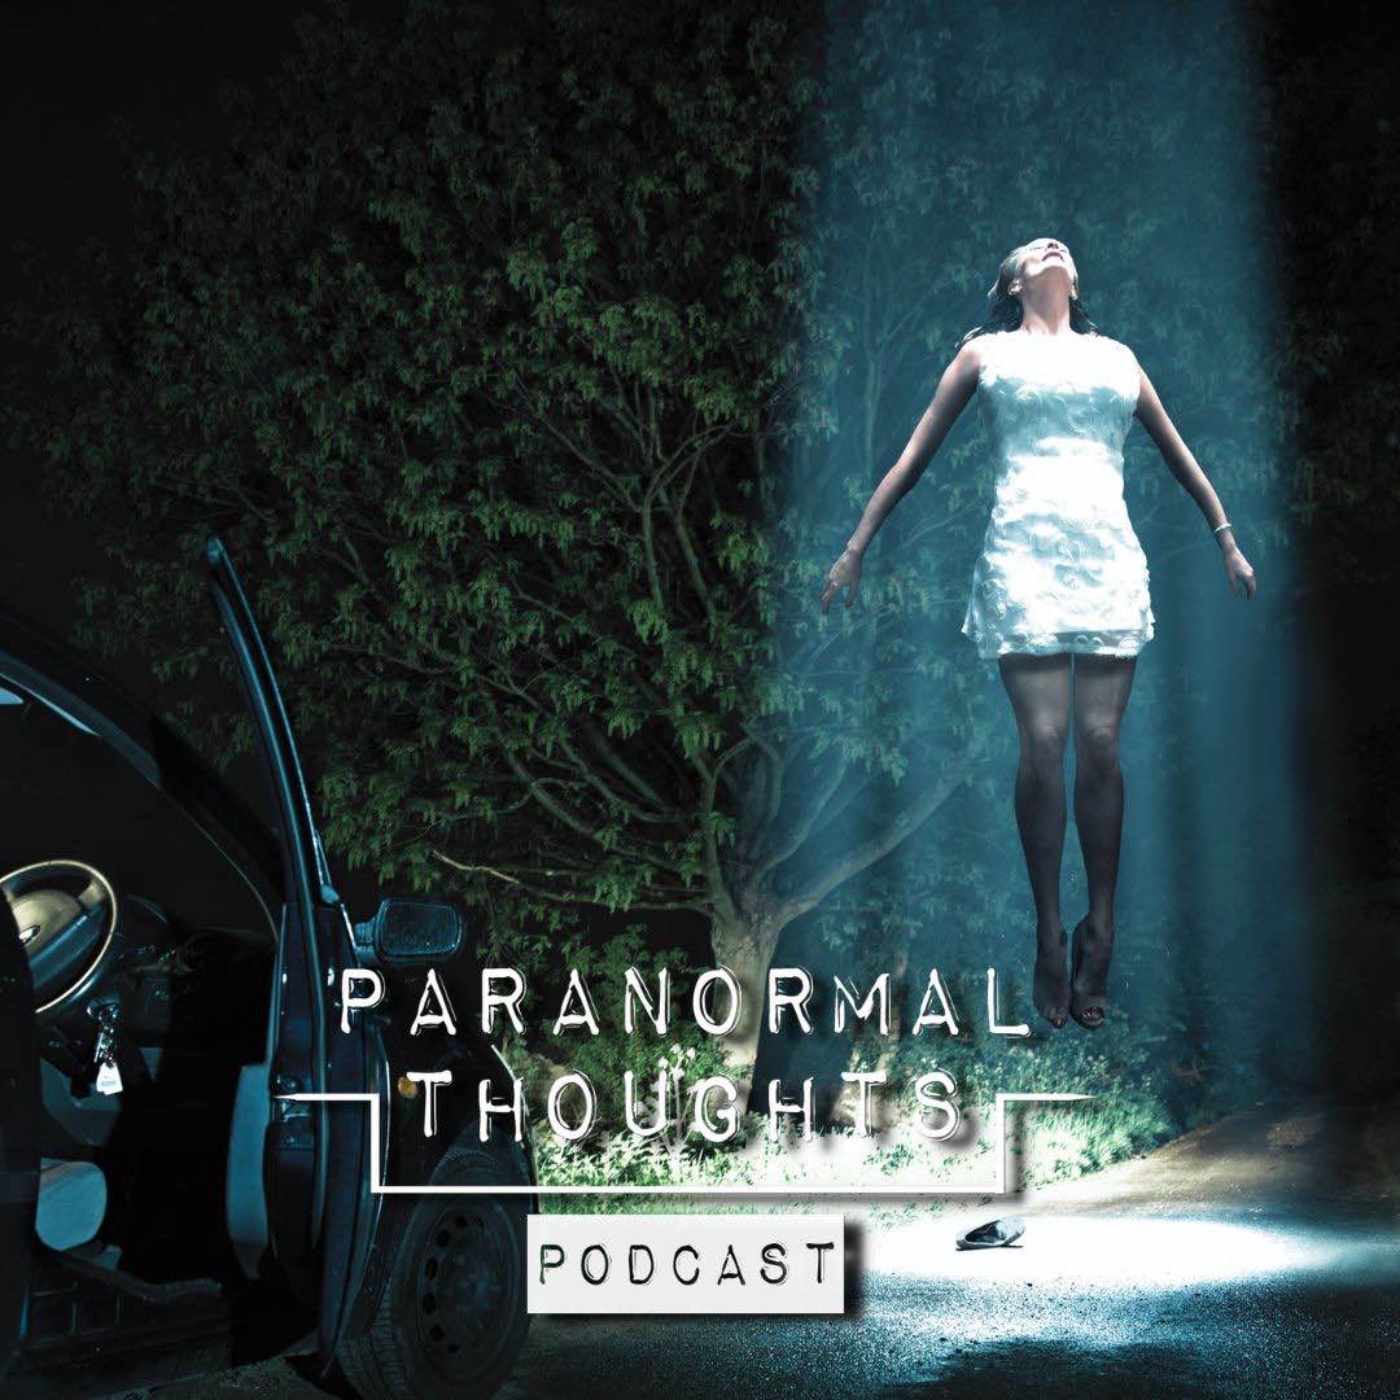 Interview with an Abductee: Anonymous Reddit User Podcast